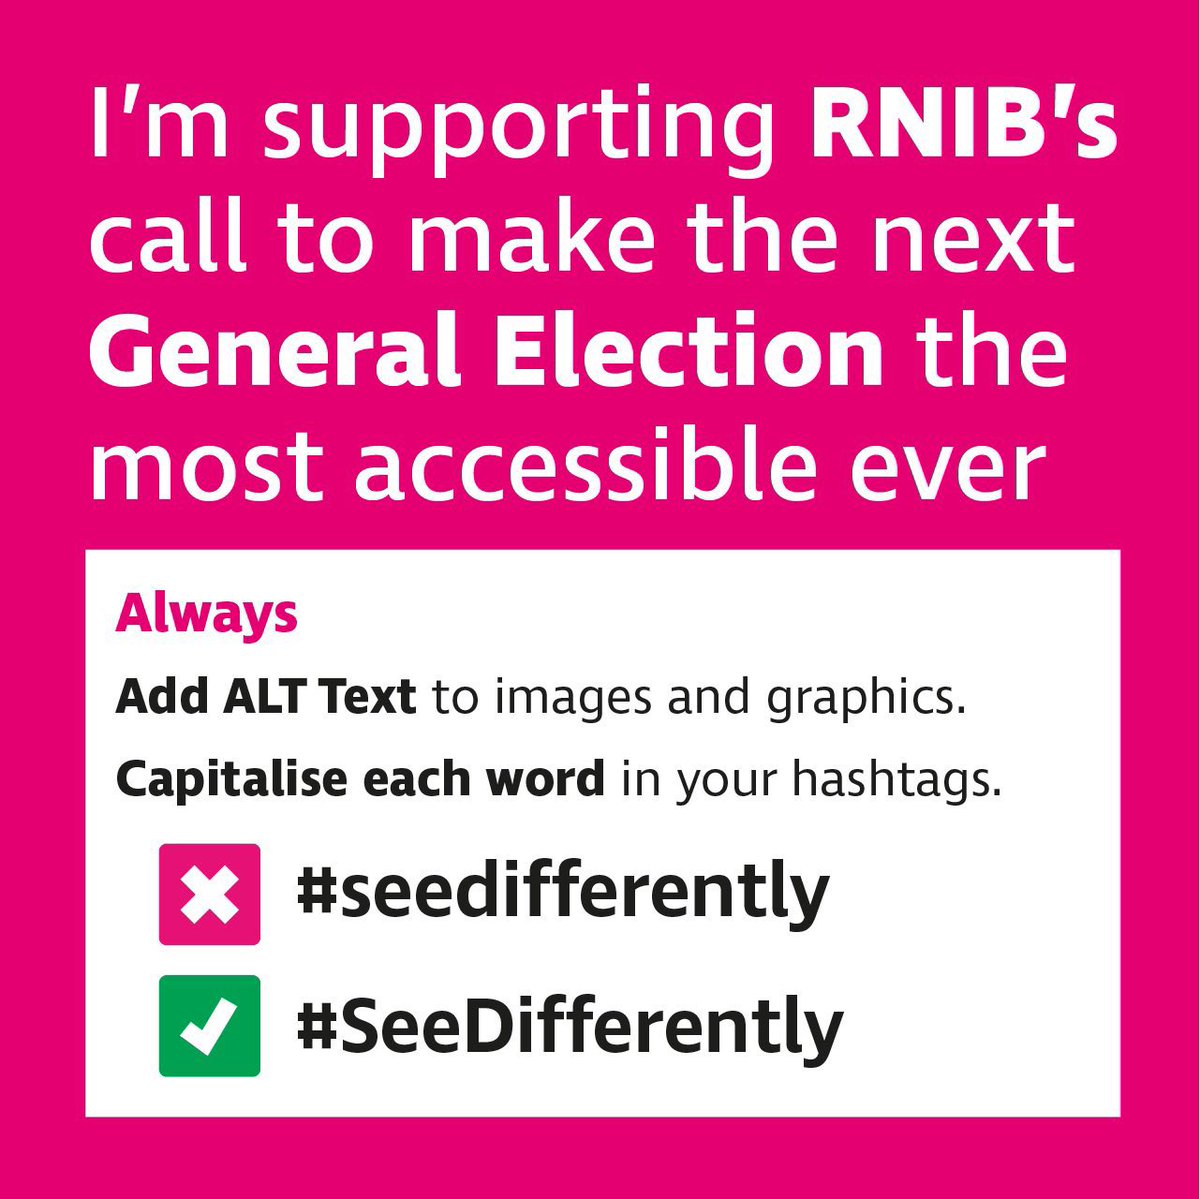 To all the political campaigners and candidates out there - support @RNIB #AltTextDay & make #GE2024 the most accessible ever #AddAltText It’s easy - just ‘Alt’ describe any photos or images so it is accessible. Also Capitalise each word in hashtags #CapitaliseYourHashtags